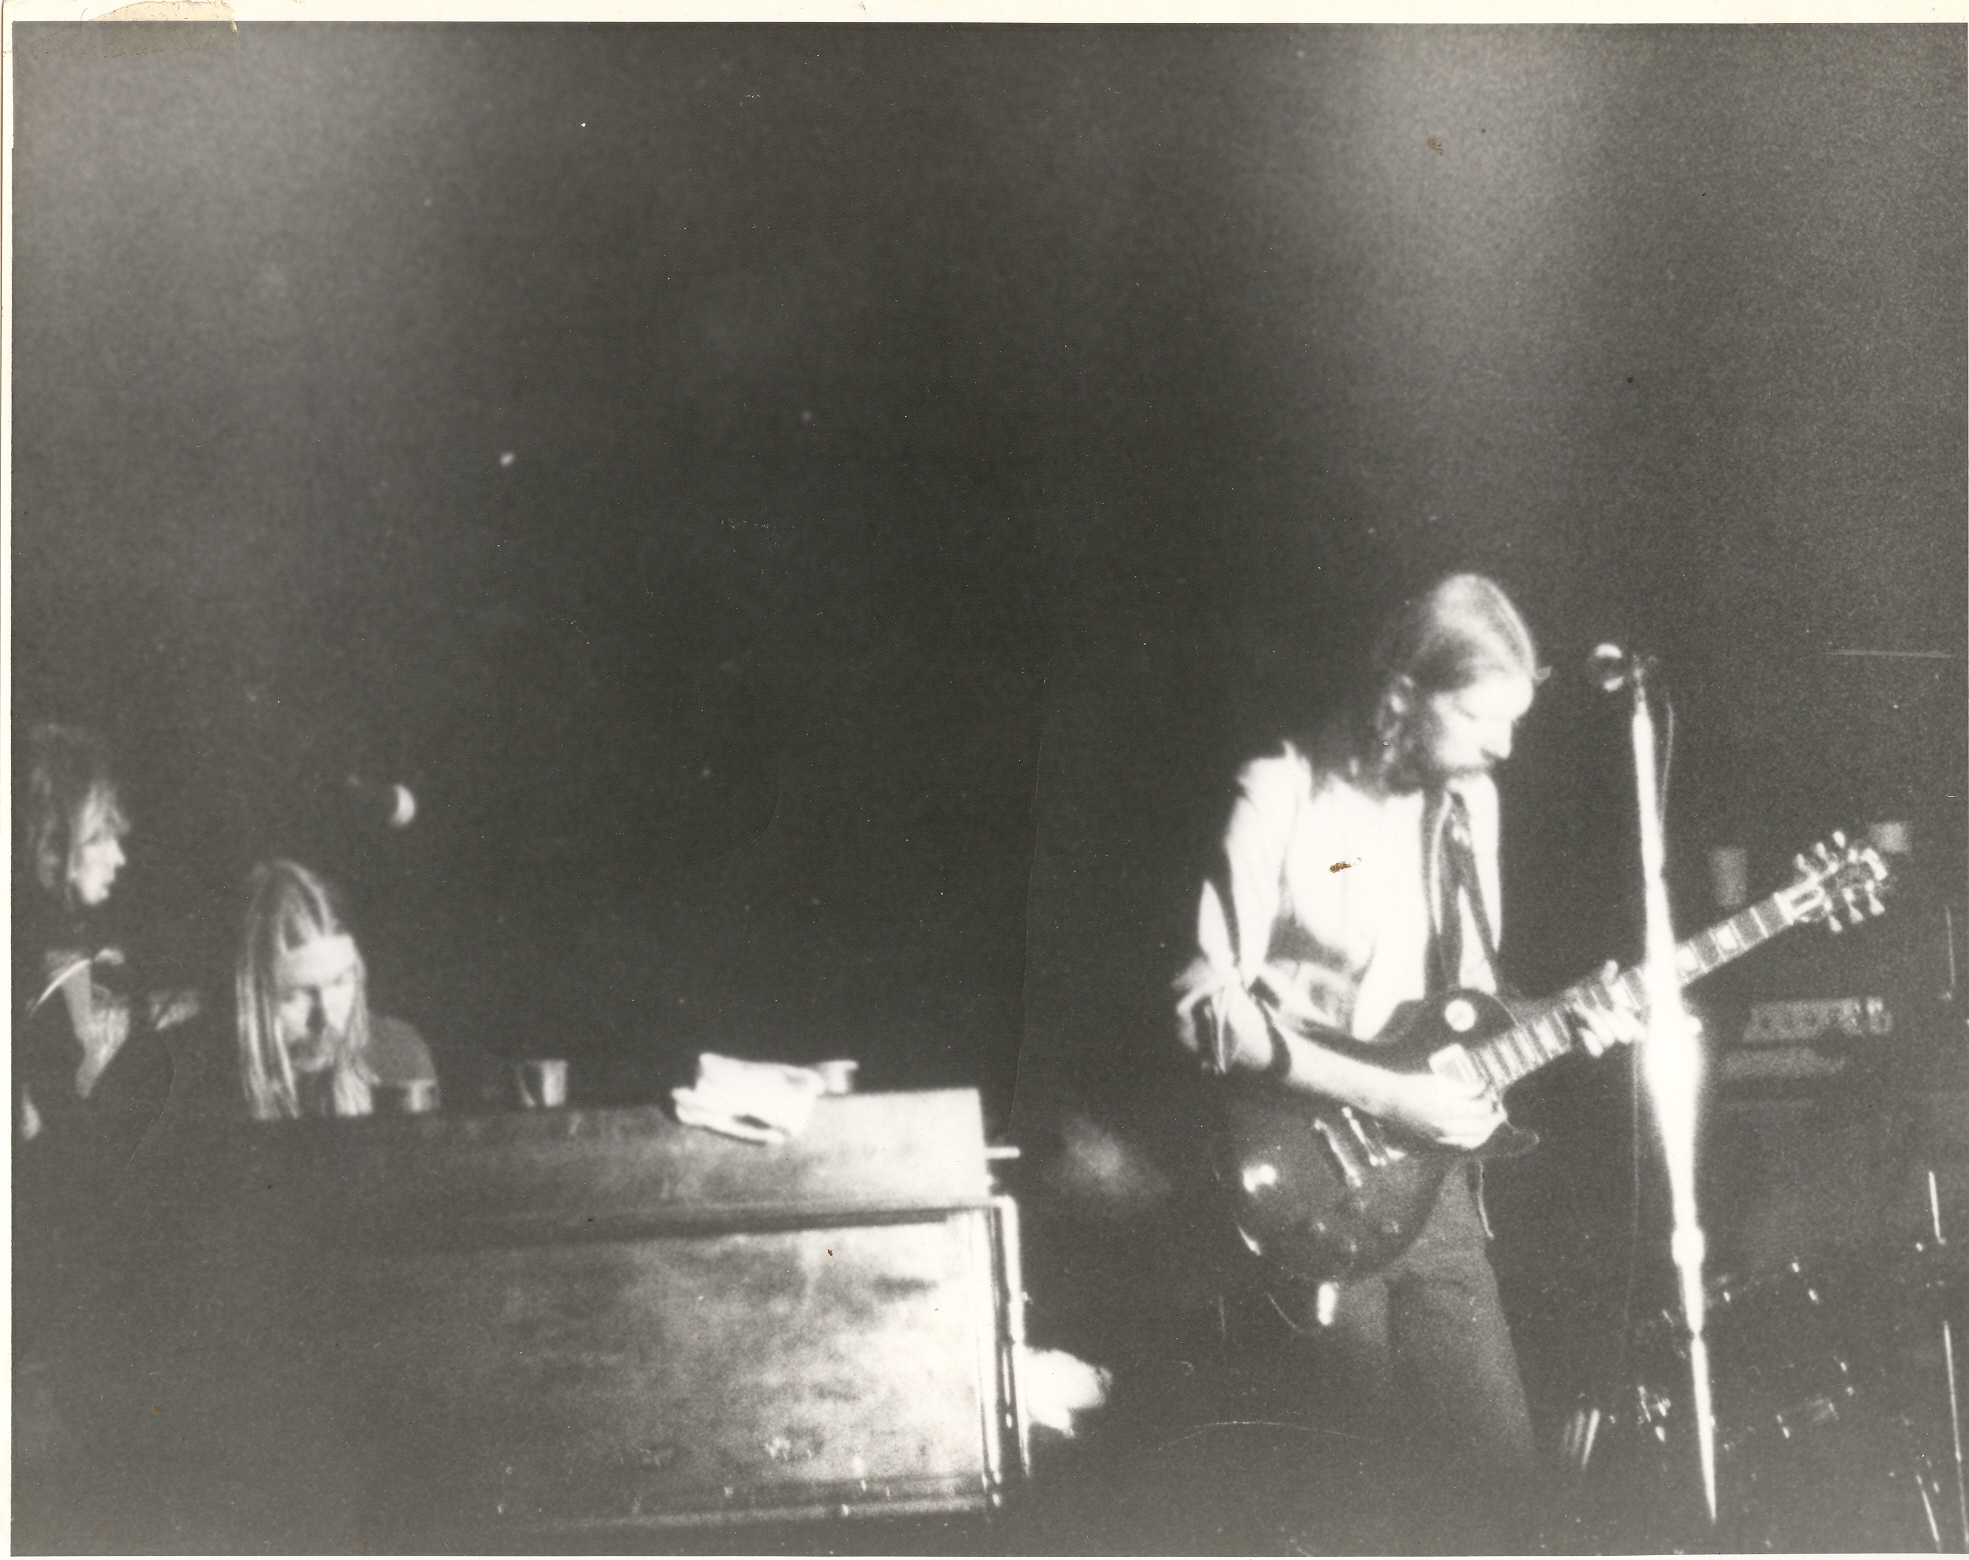 Was told this photo was taken 04-22-1971 at Middle Tennessee State University. Opening act: Ides of March (